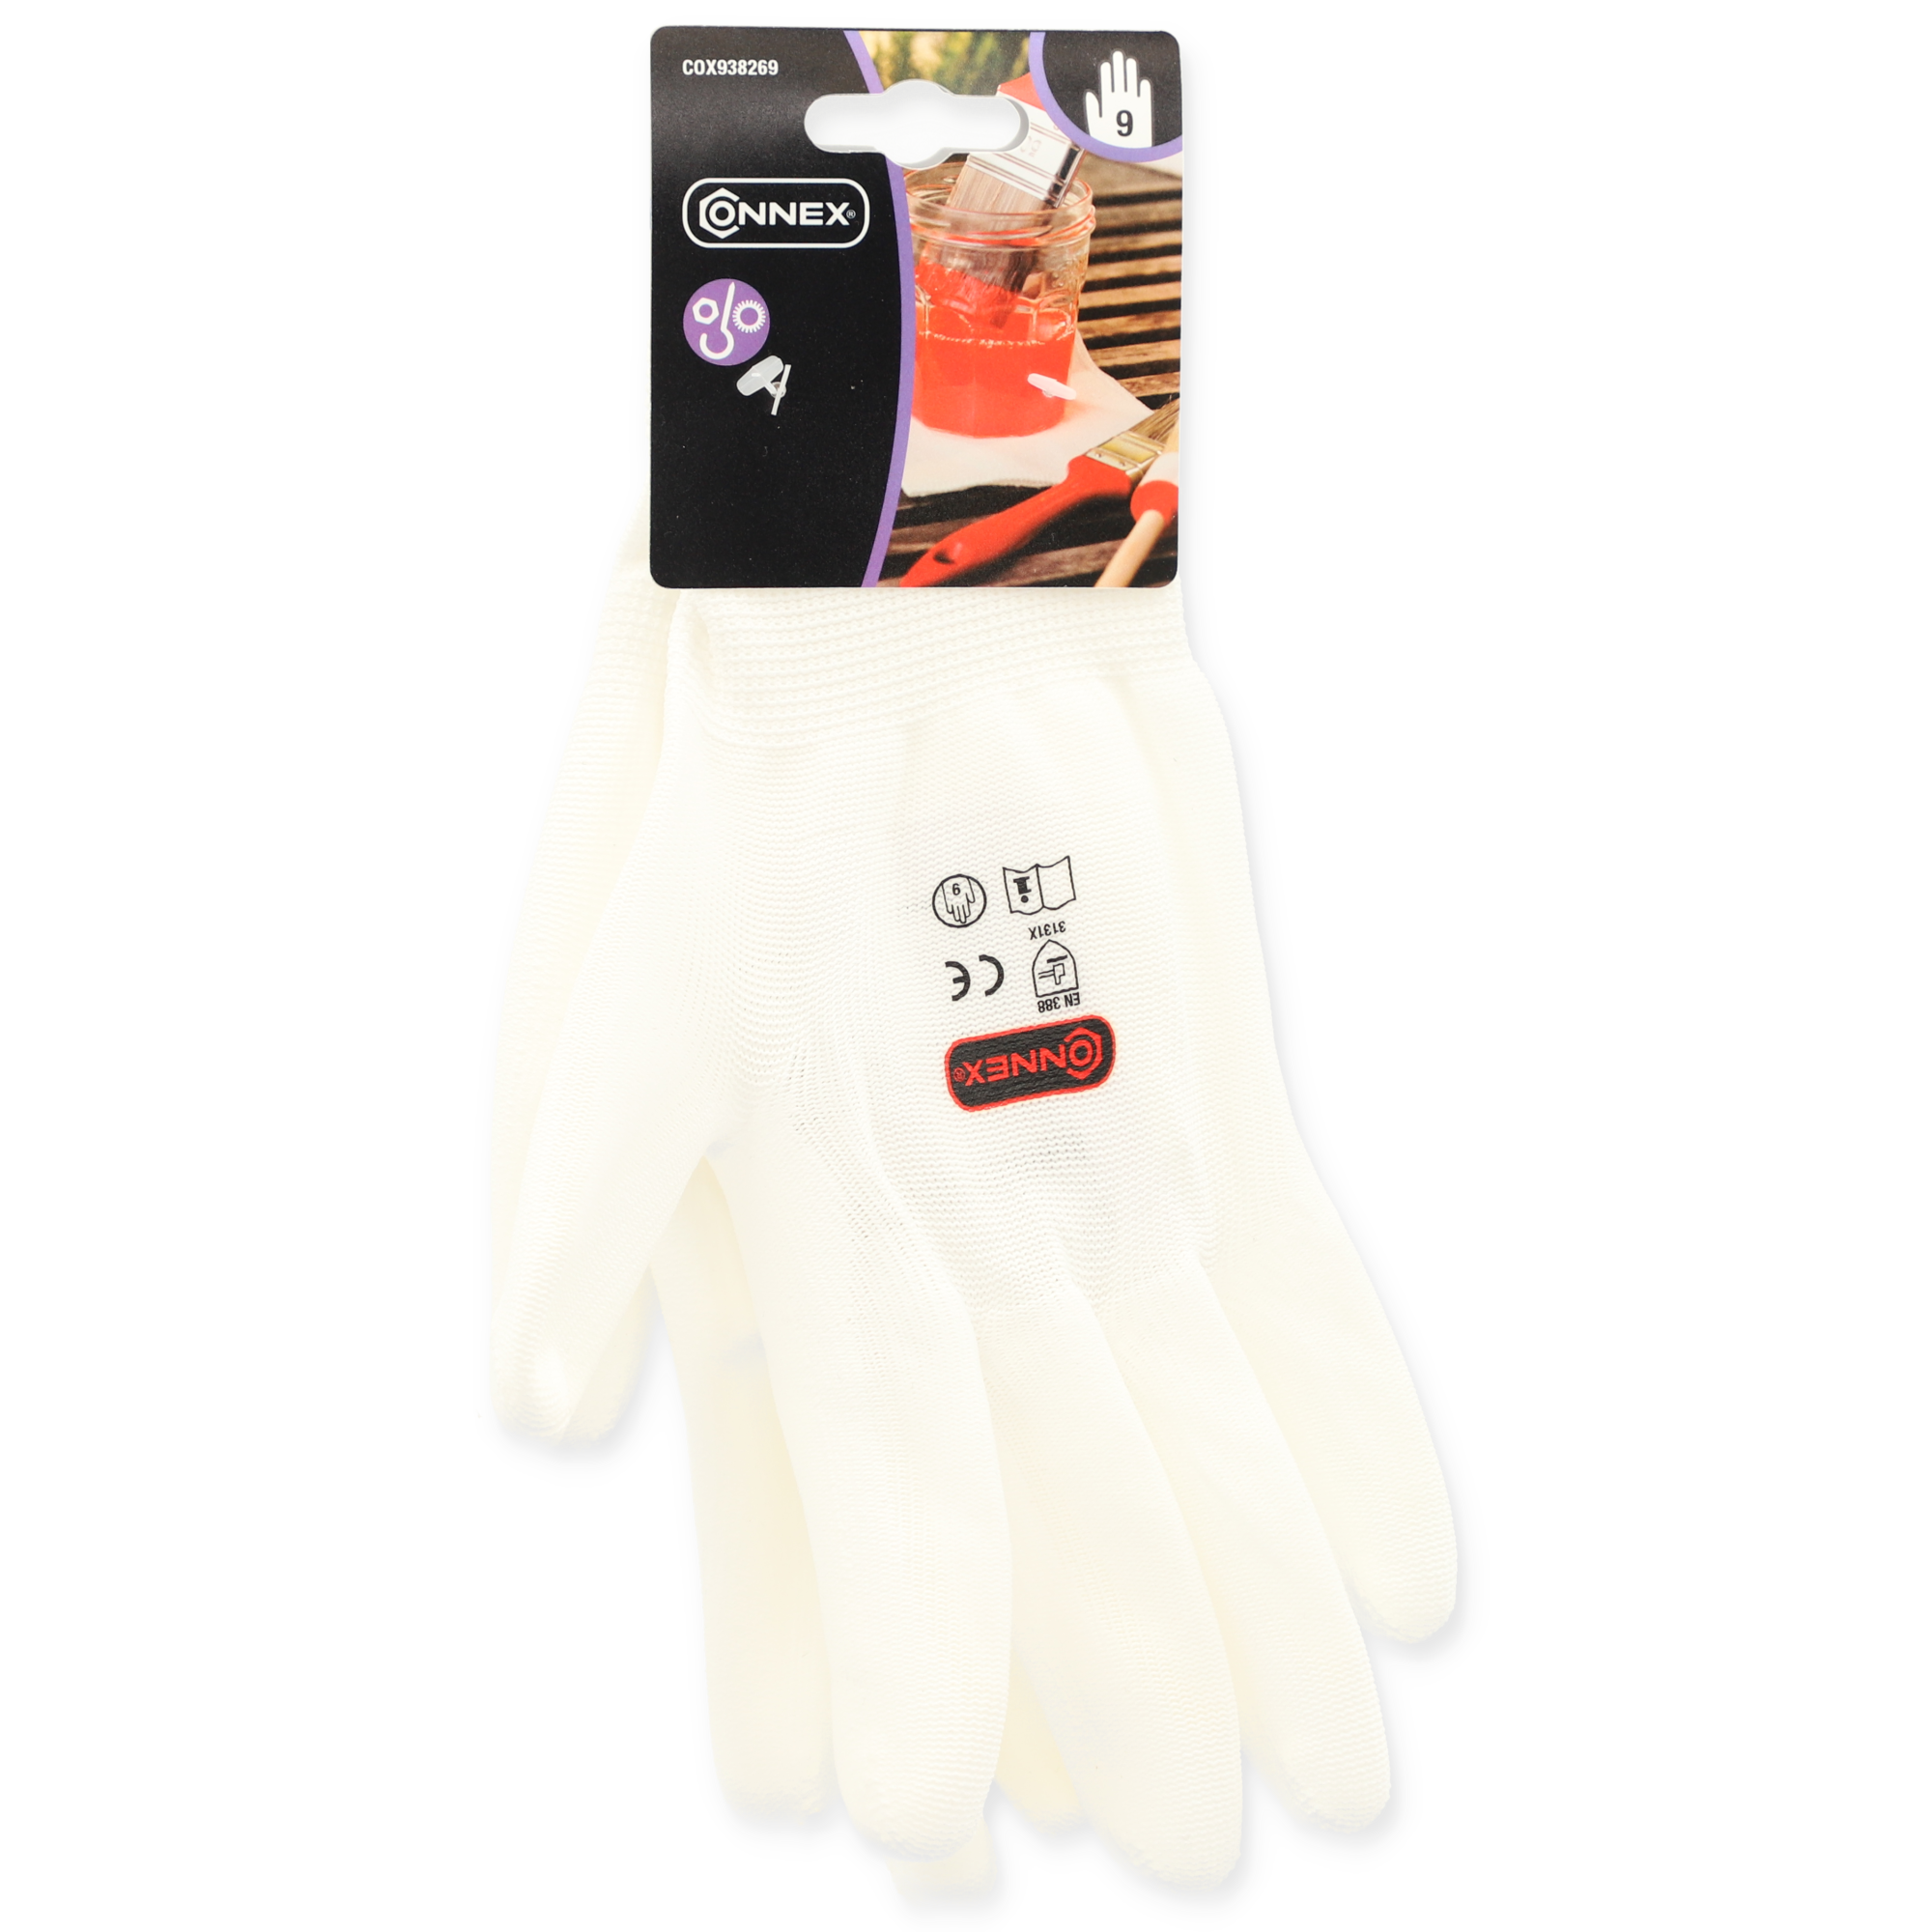 Maler-Handschuhe weiß Gr. 9 + product picture